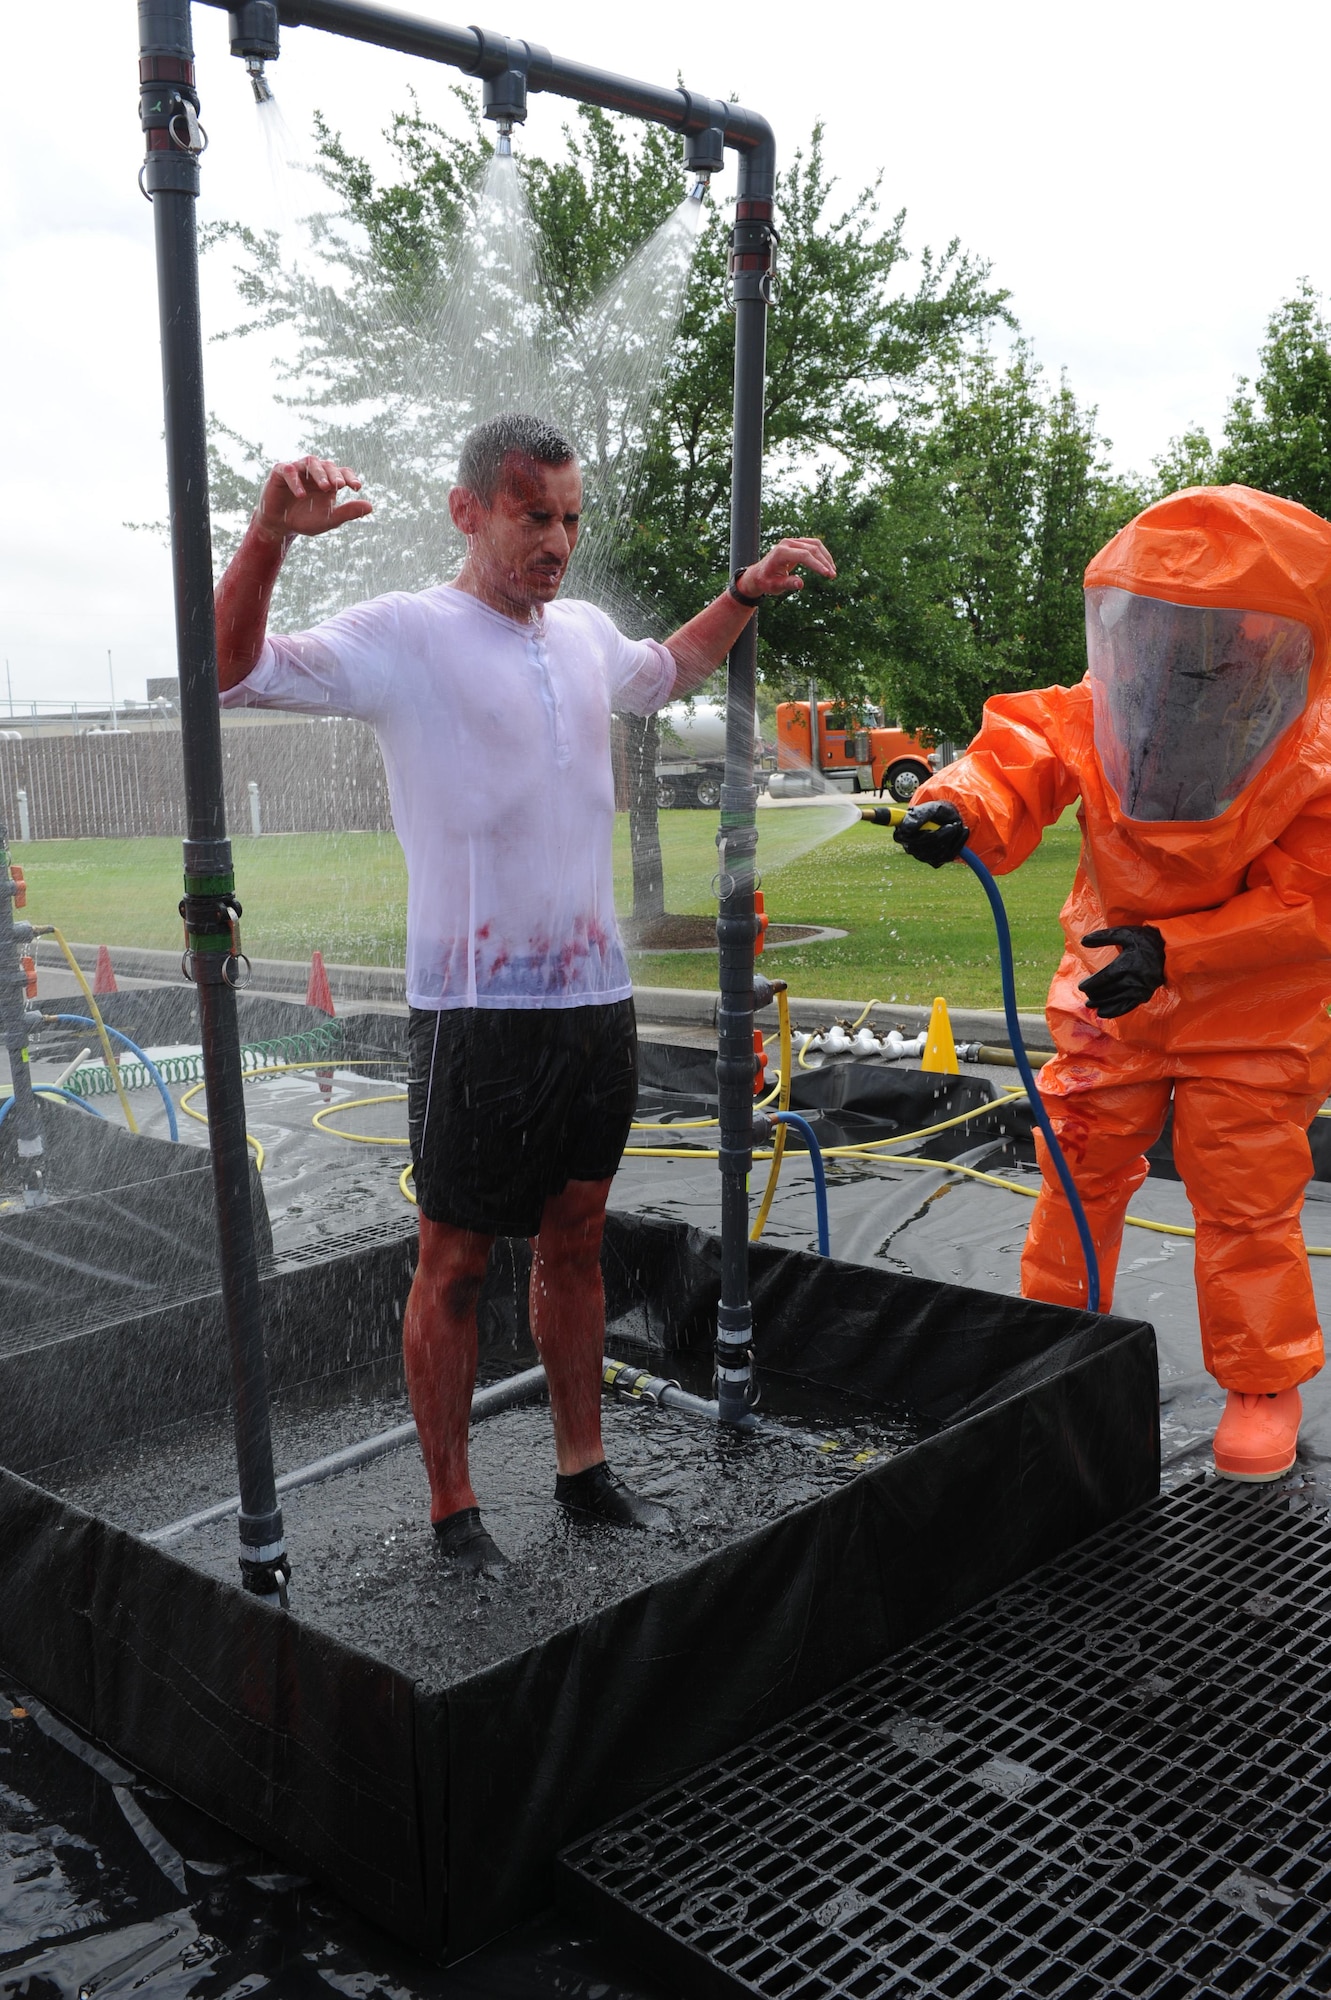 An 81st Infrastructure Division firefighter follows decontamination procedures on Airman 1st Class David Brown, 336th Training Squadron student, as he portrays a “victim” who was contaminated during a Chemical, Biological, Radiological, Nuclear and Explosive exercise scenario, April 21, 2016, Keesler Air Force Base, Miss. The Force Protection Condition exercise scenario simulated an intruder entering the hazardous waste 90-day accumulation site, where an explosion occurred causing a mass casualty event. The exercise tested the base’s capability to react to and recover from a mass casualty event. (U.S. Air Force photo by Kemberly Groue)